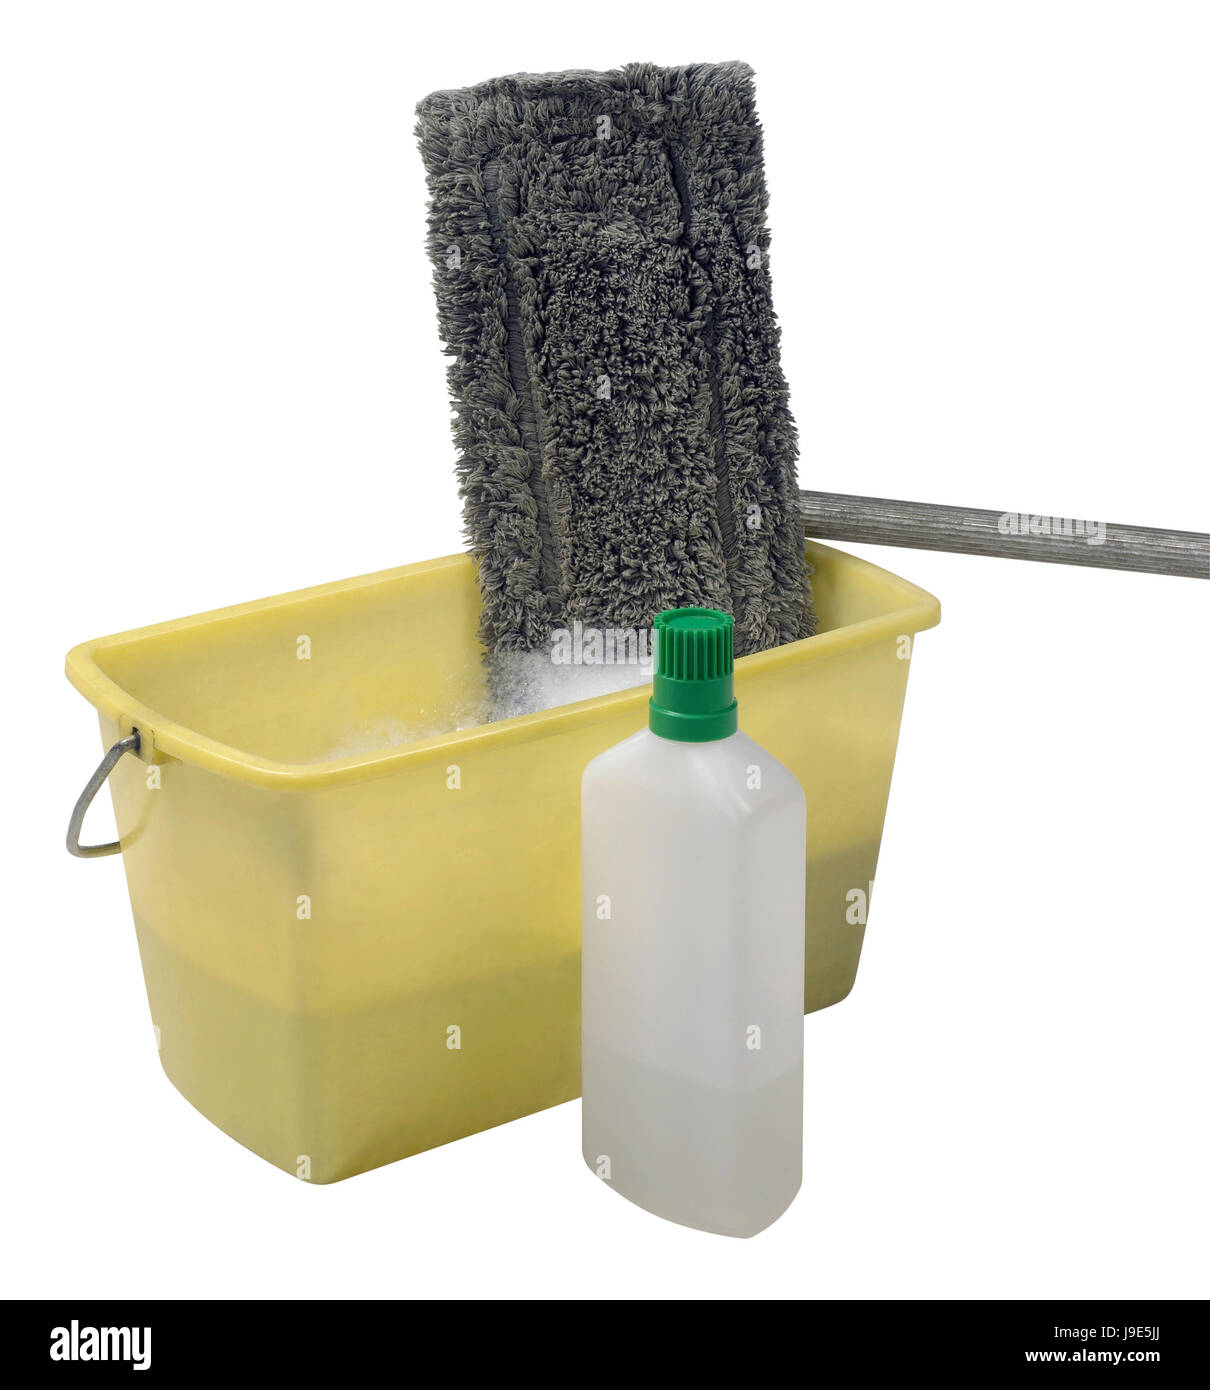 cleaning mop with bucket and cleaner Stock Photo